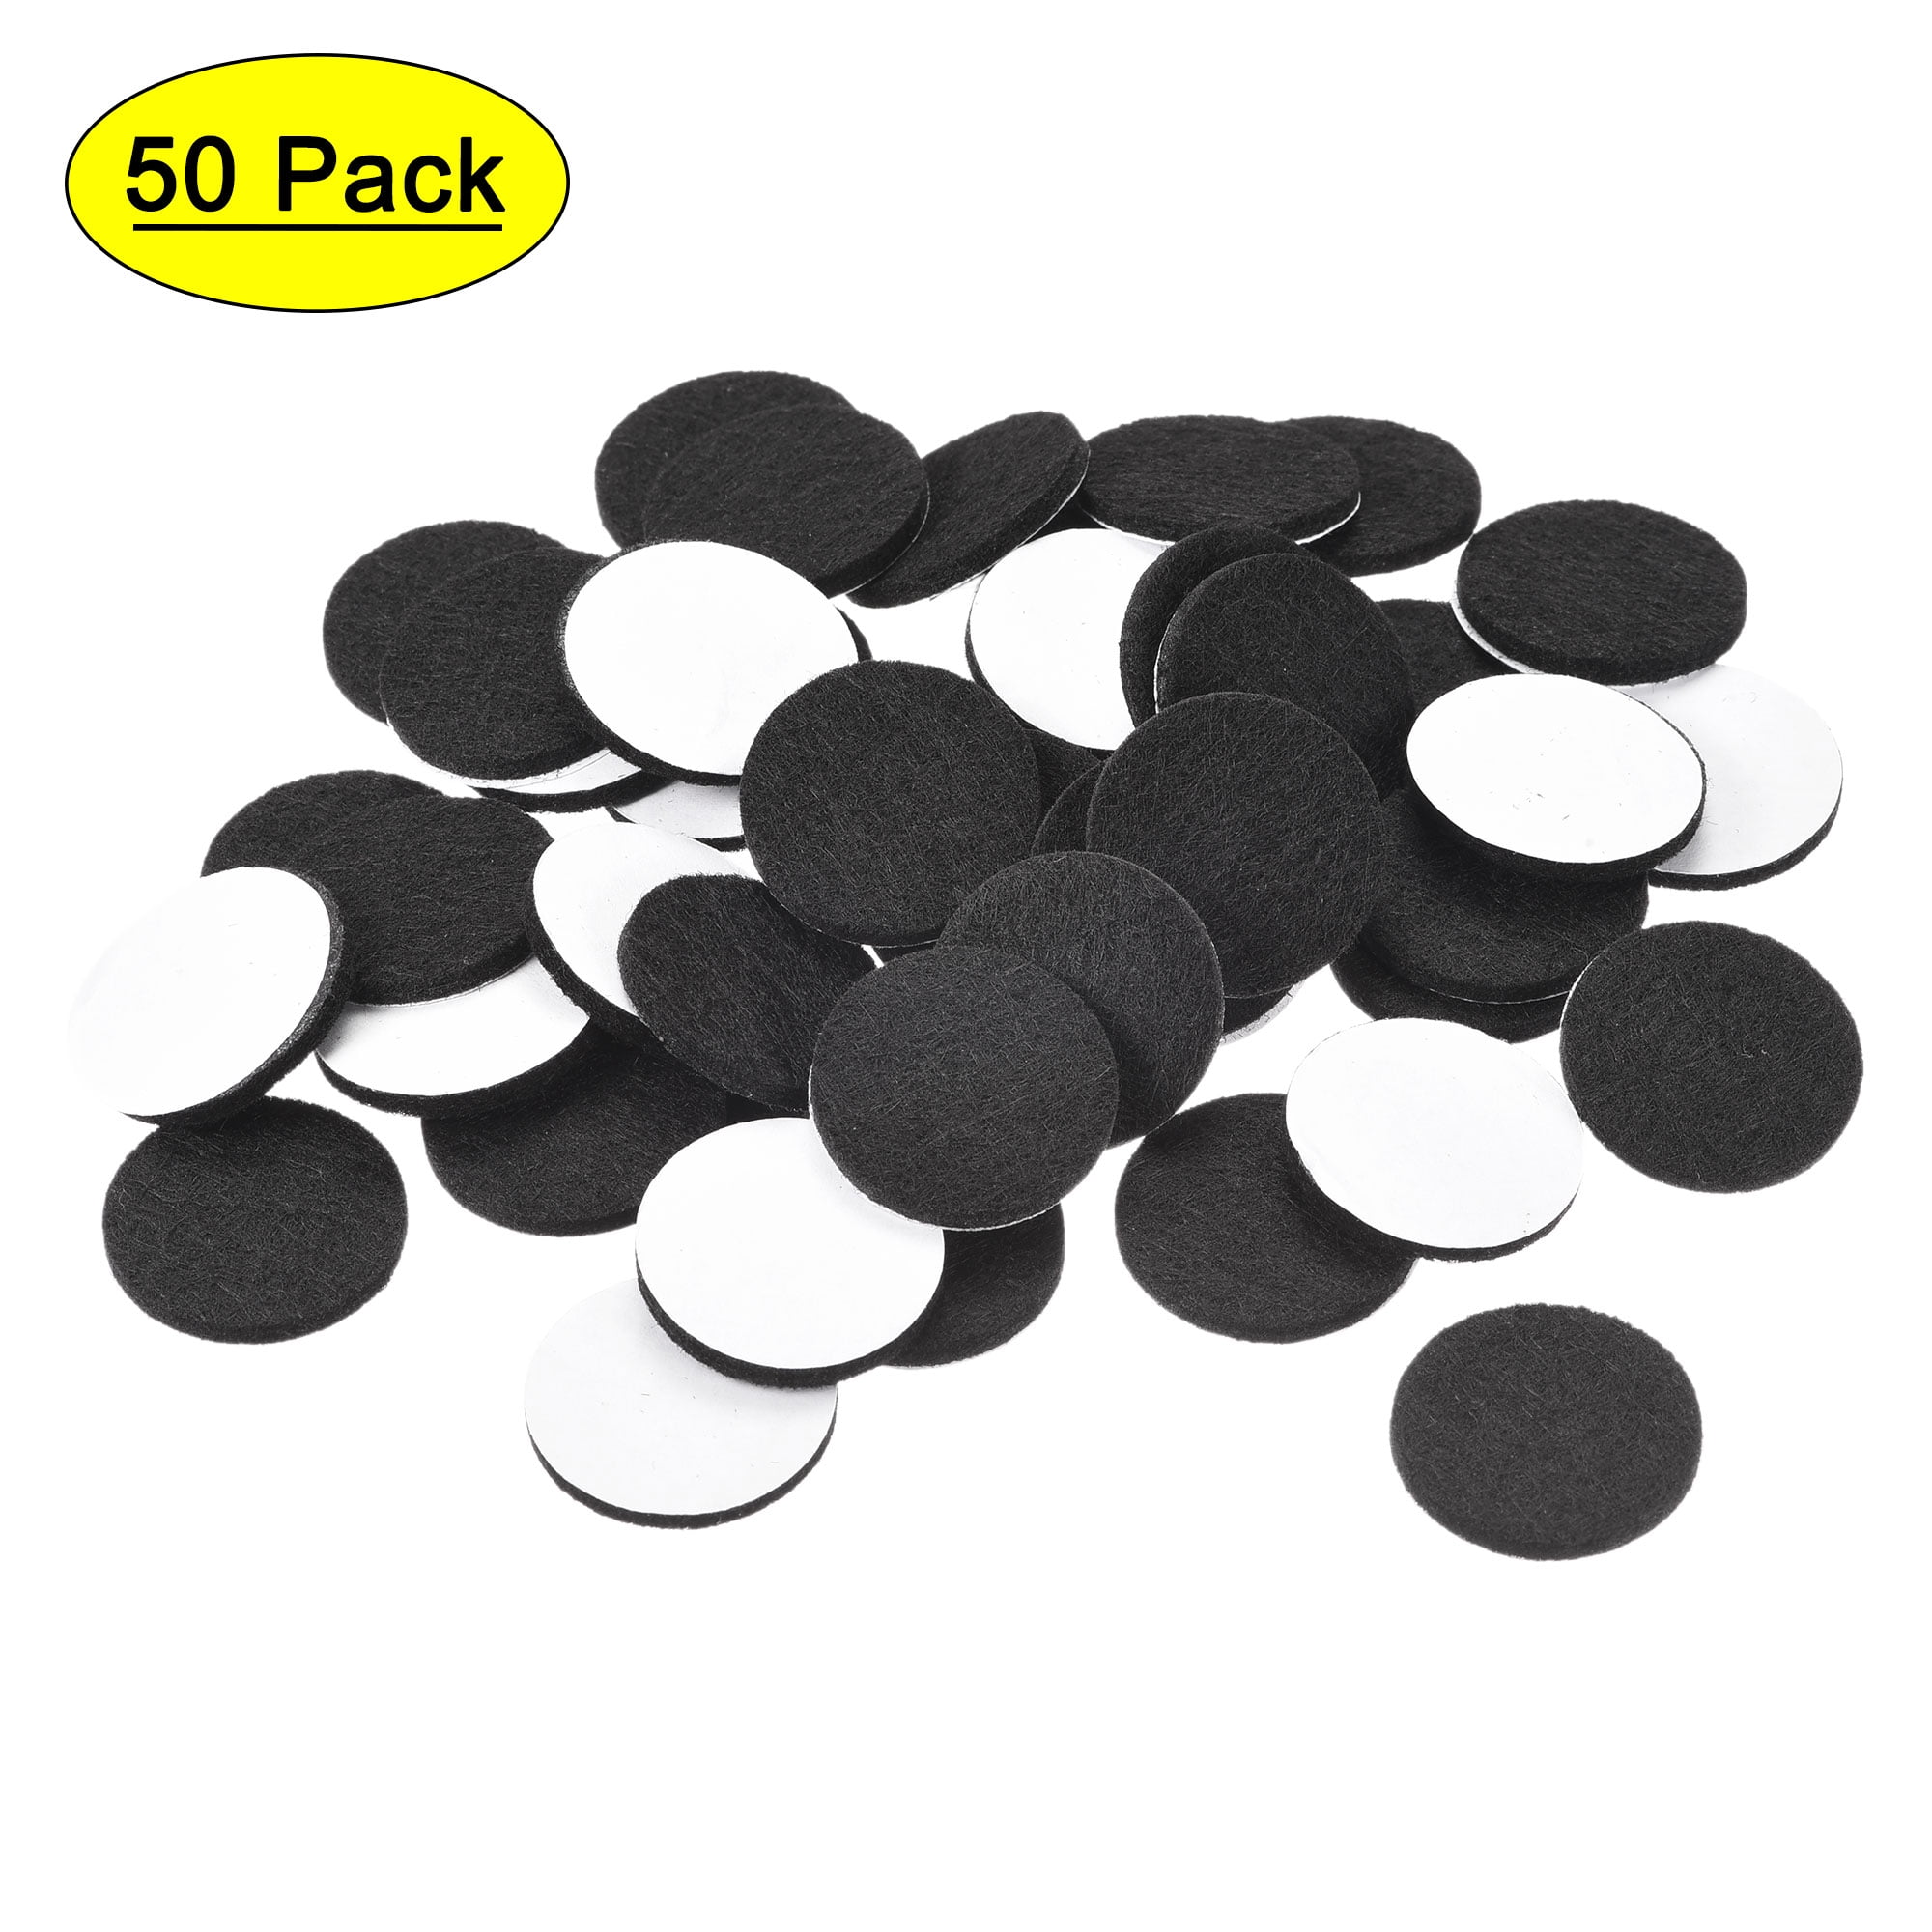 Self Adhesive Felt Furniture Pads Scratch Protection For Floors Walls L3X6 